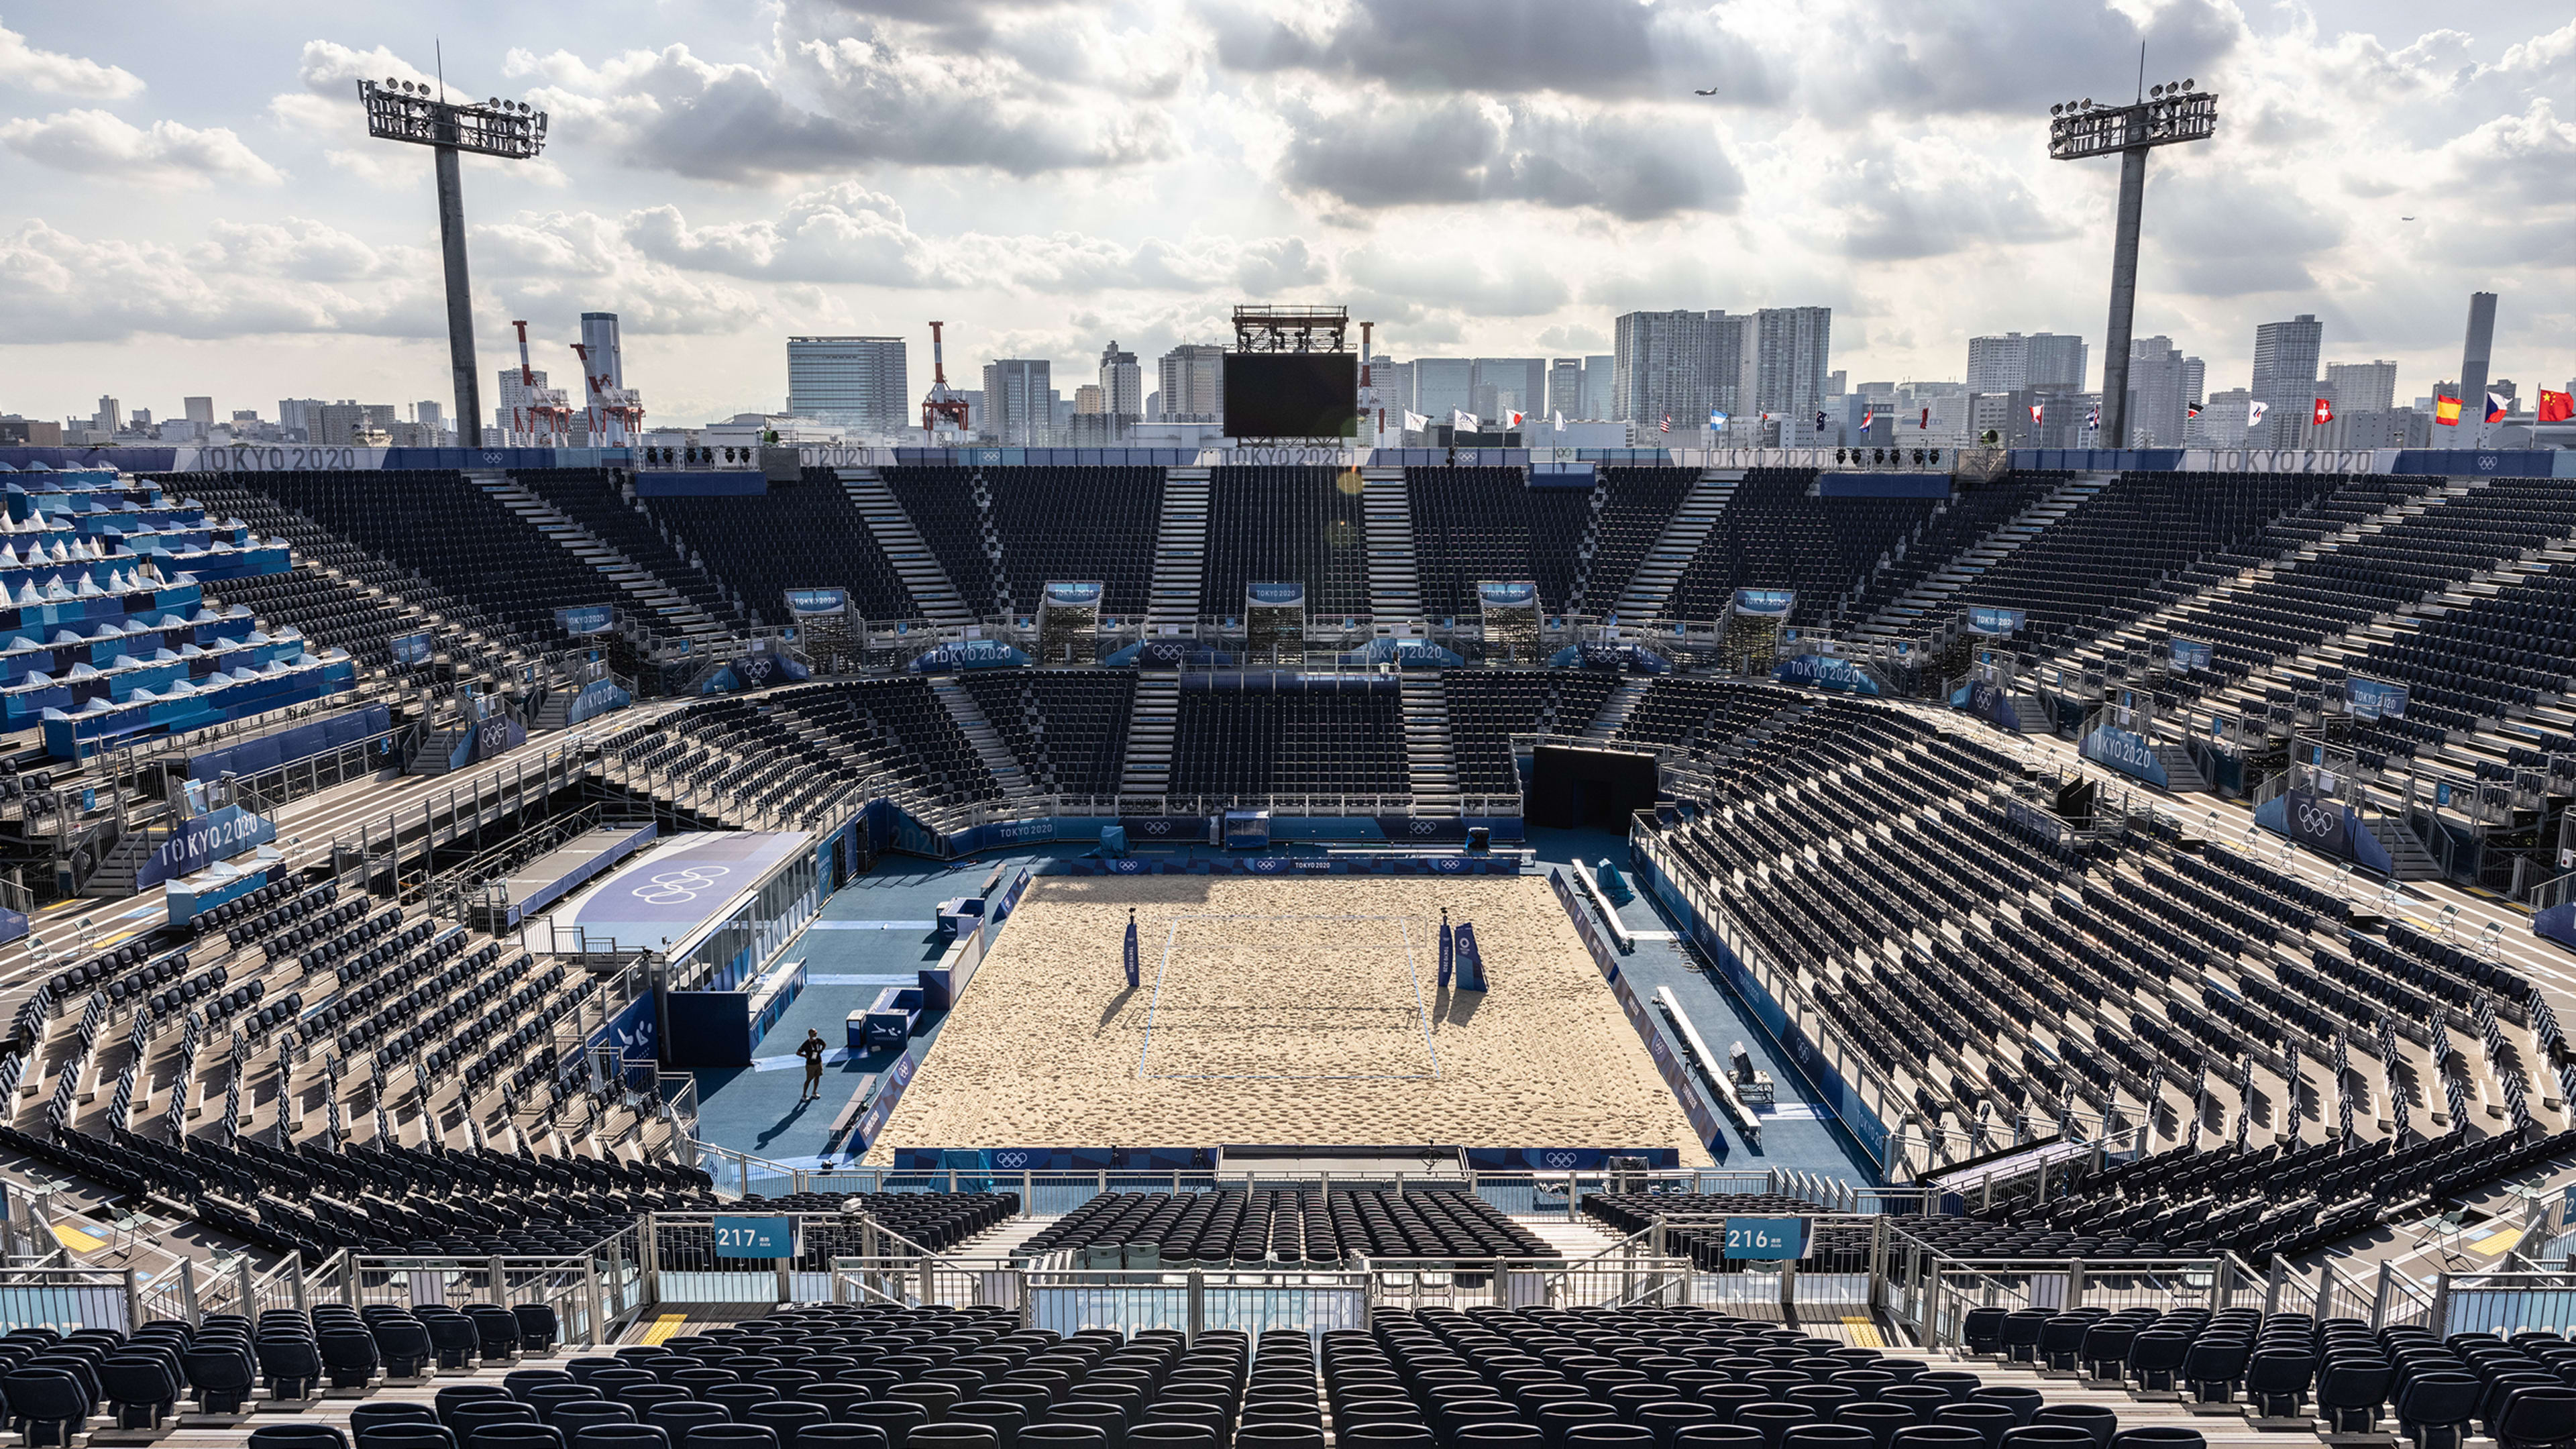 Tokyo 2020: With no spectators, local sponsors lose out